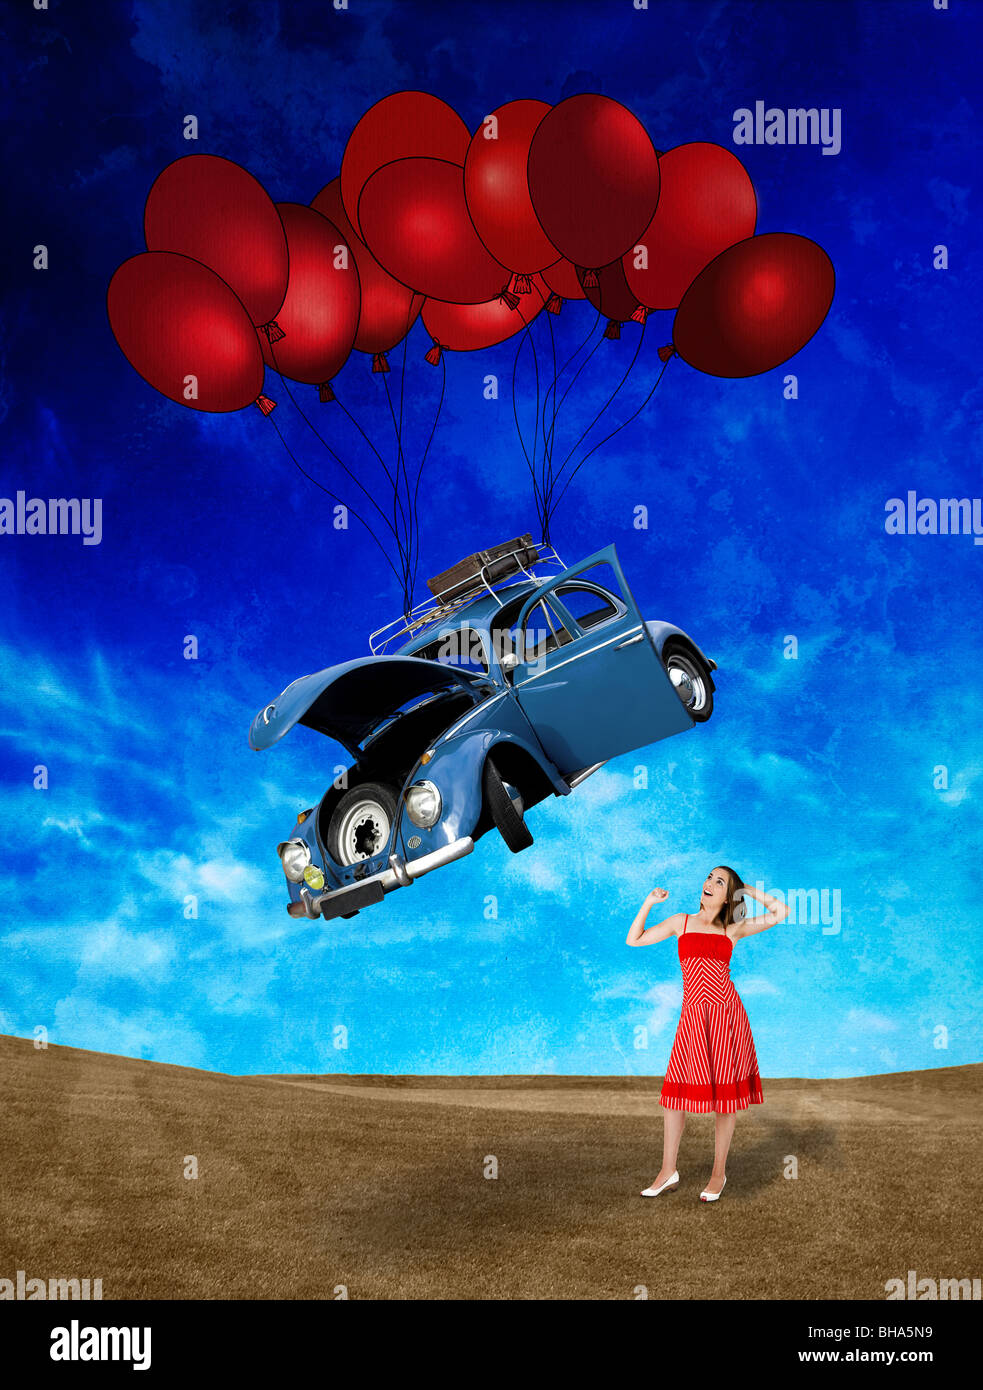 Woman witing for a beetle car falling from the sky with balloons Stock Photo